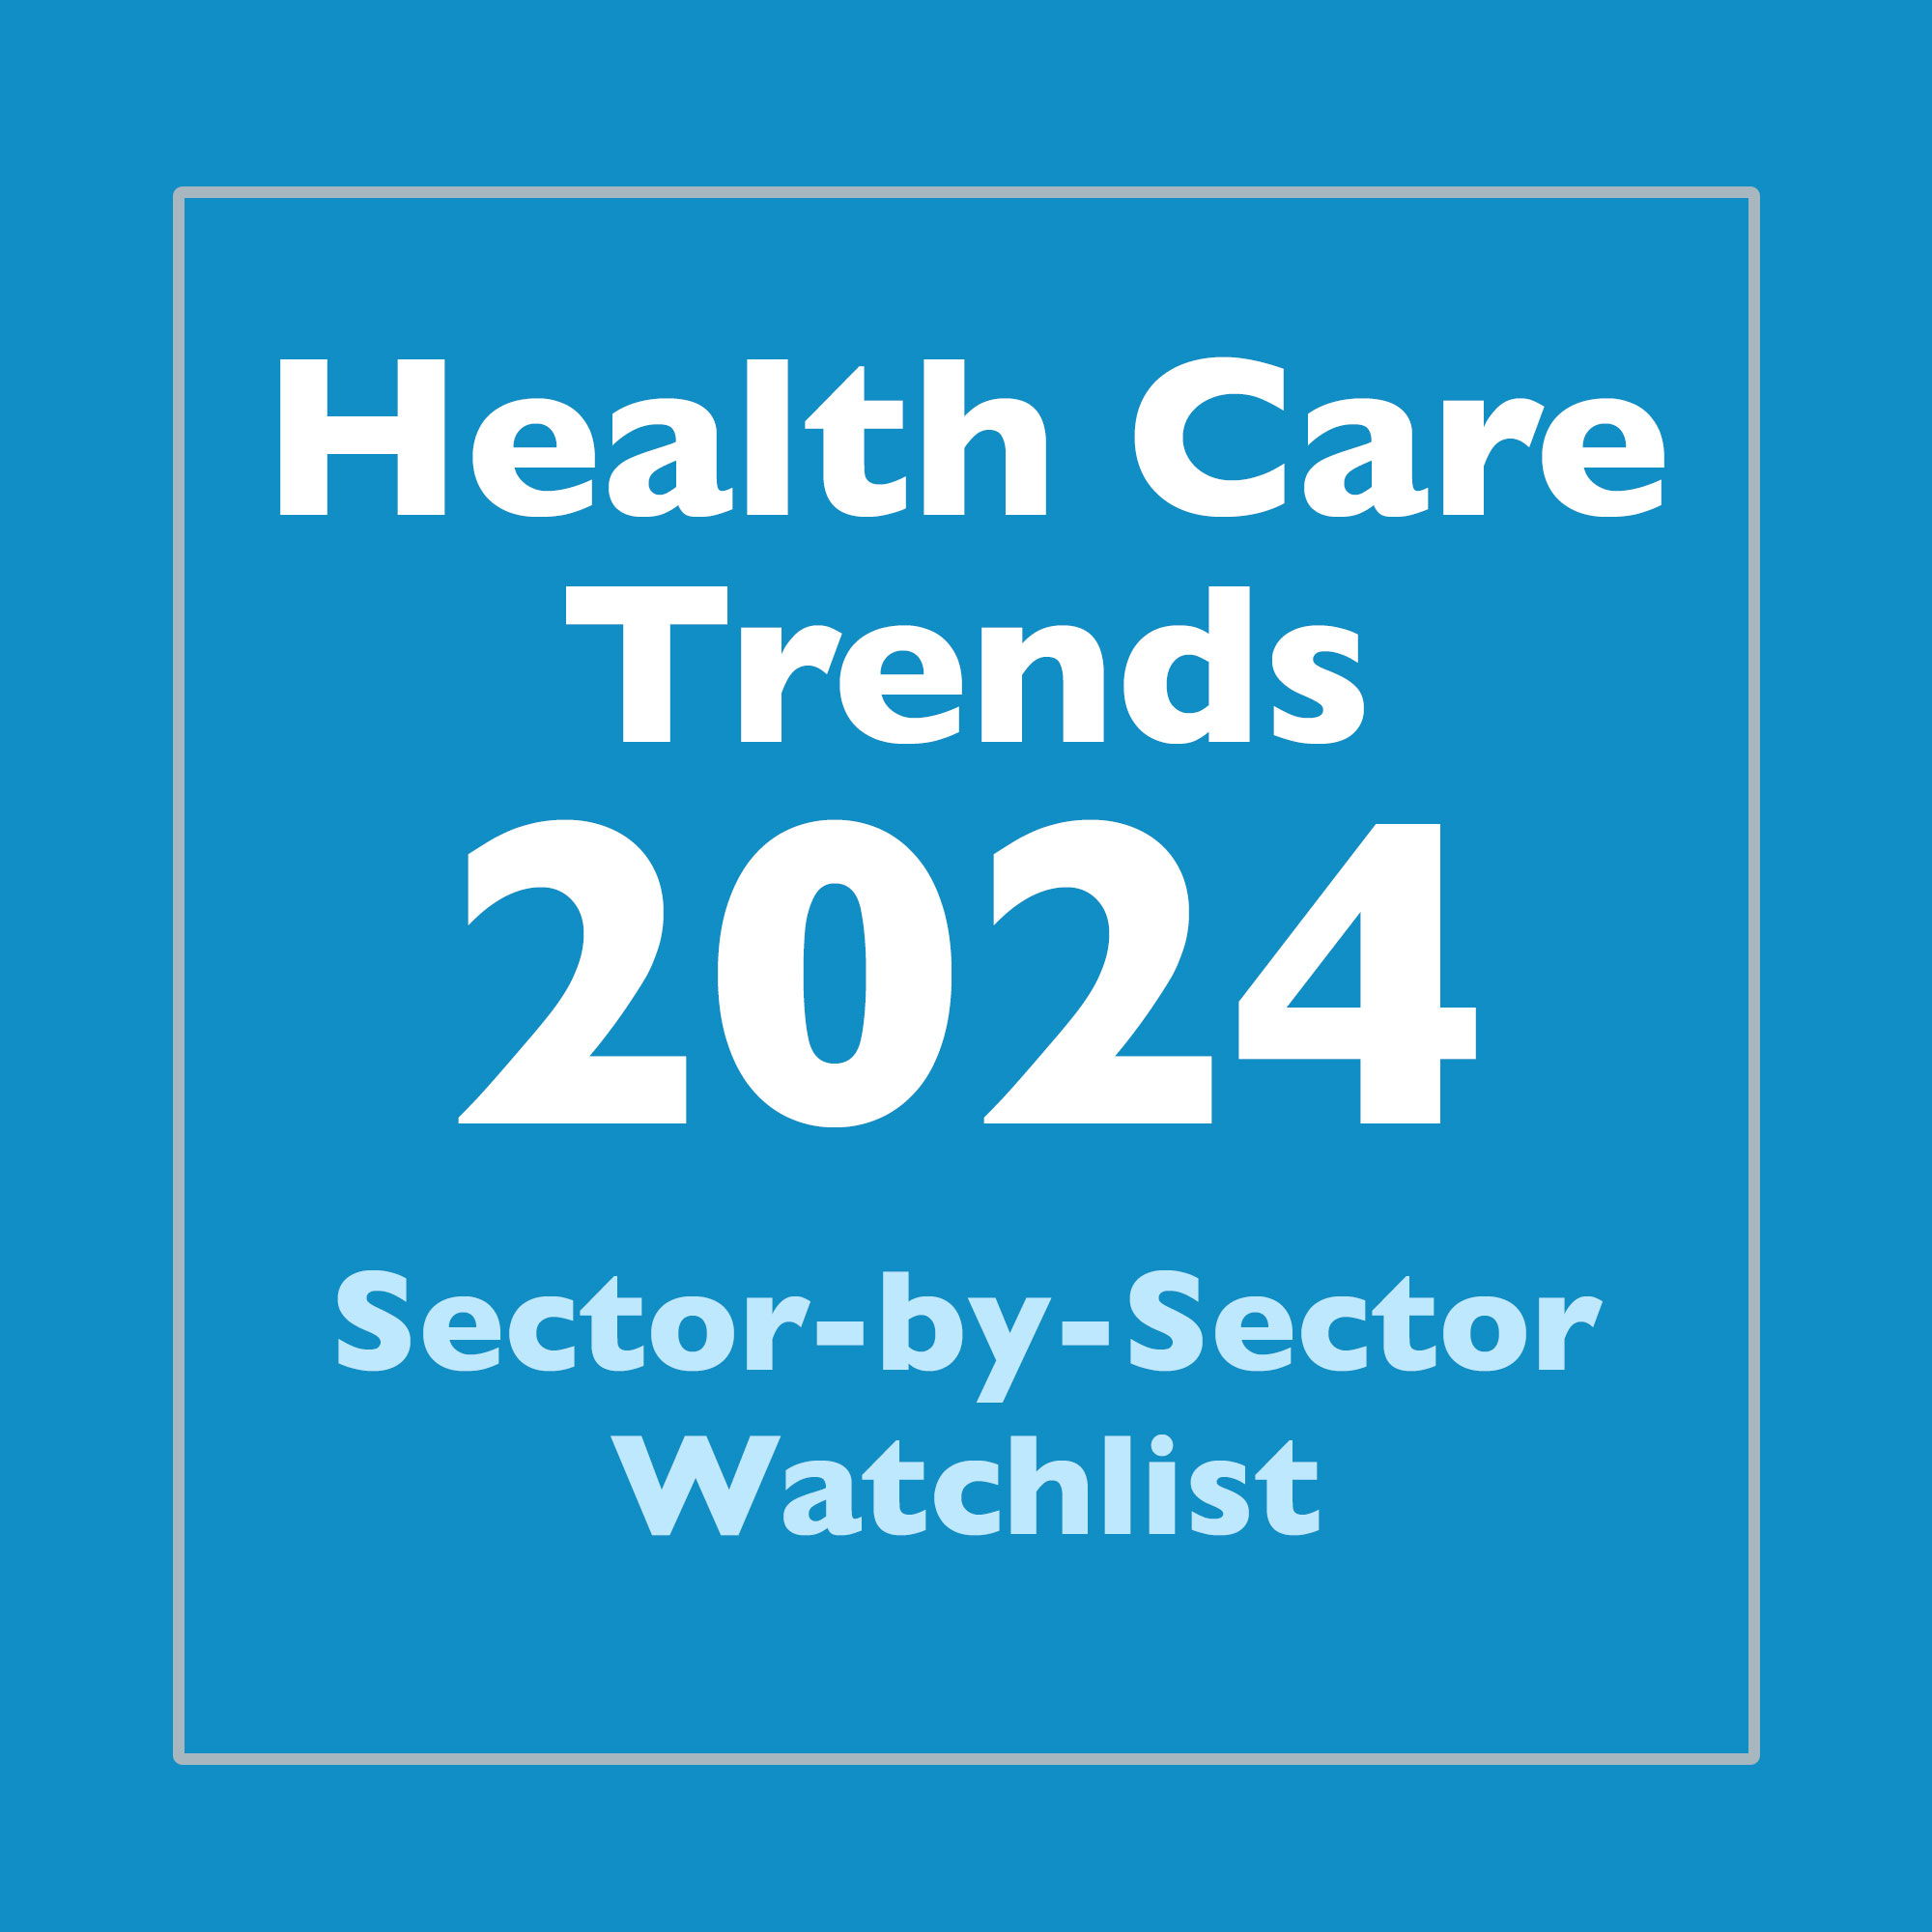 Health Care Trends 2024 SectorbySector Watchlist